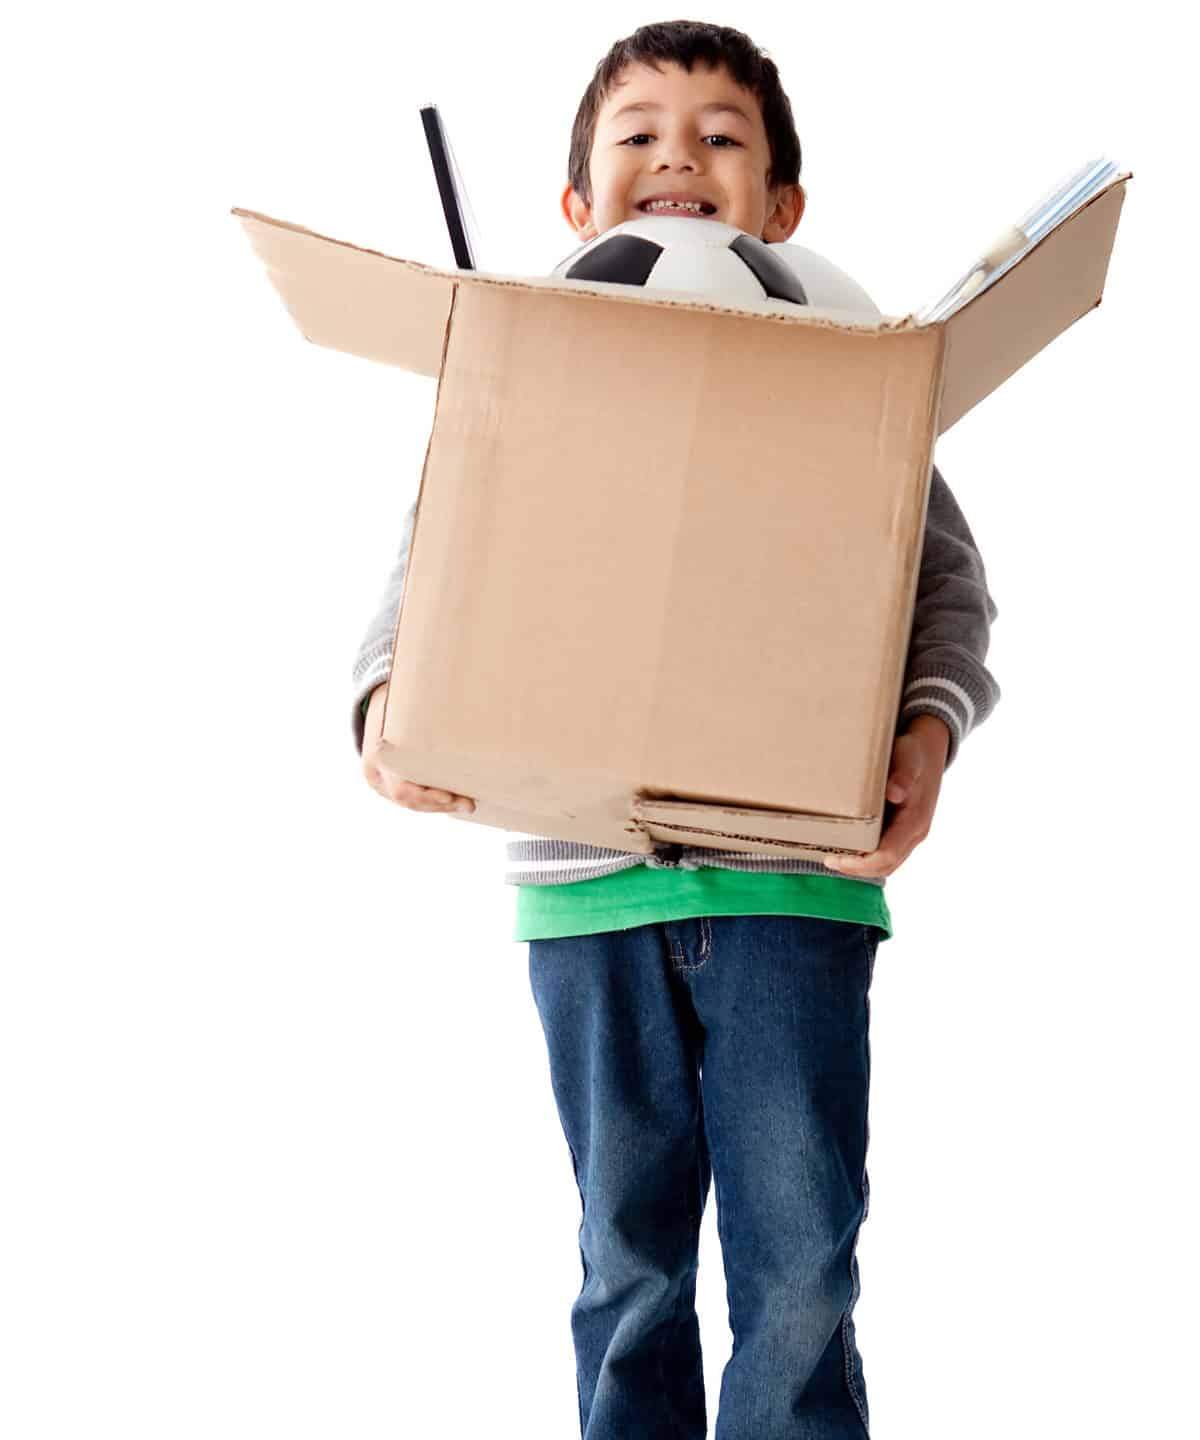 Boy holding a box with toys â?? isolated over a white background